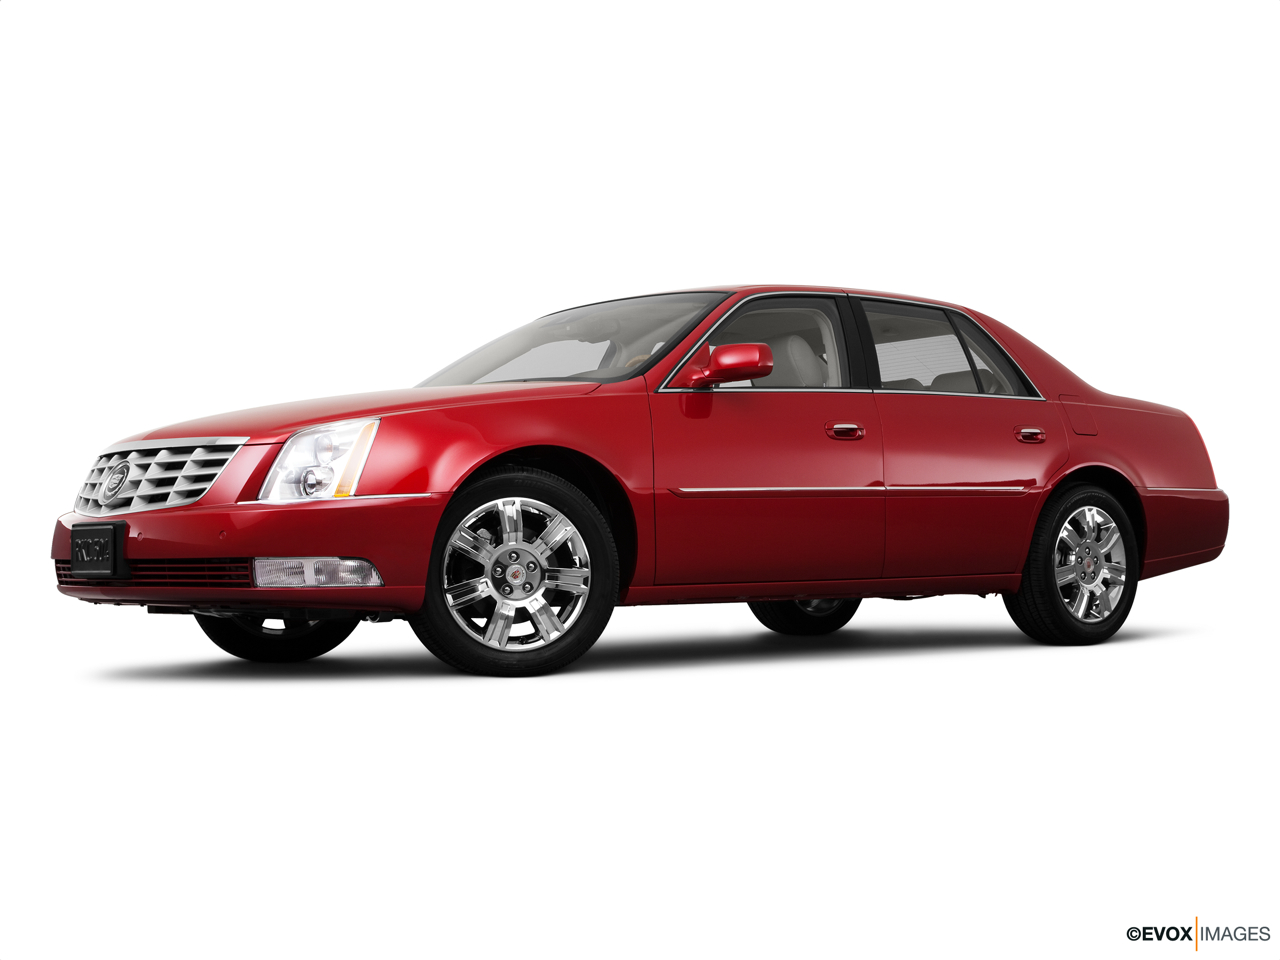 2011 Cadillac DTS Platinum Low/wide front 5/8. 